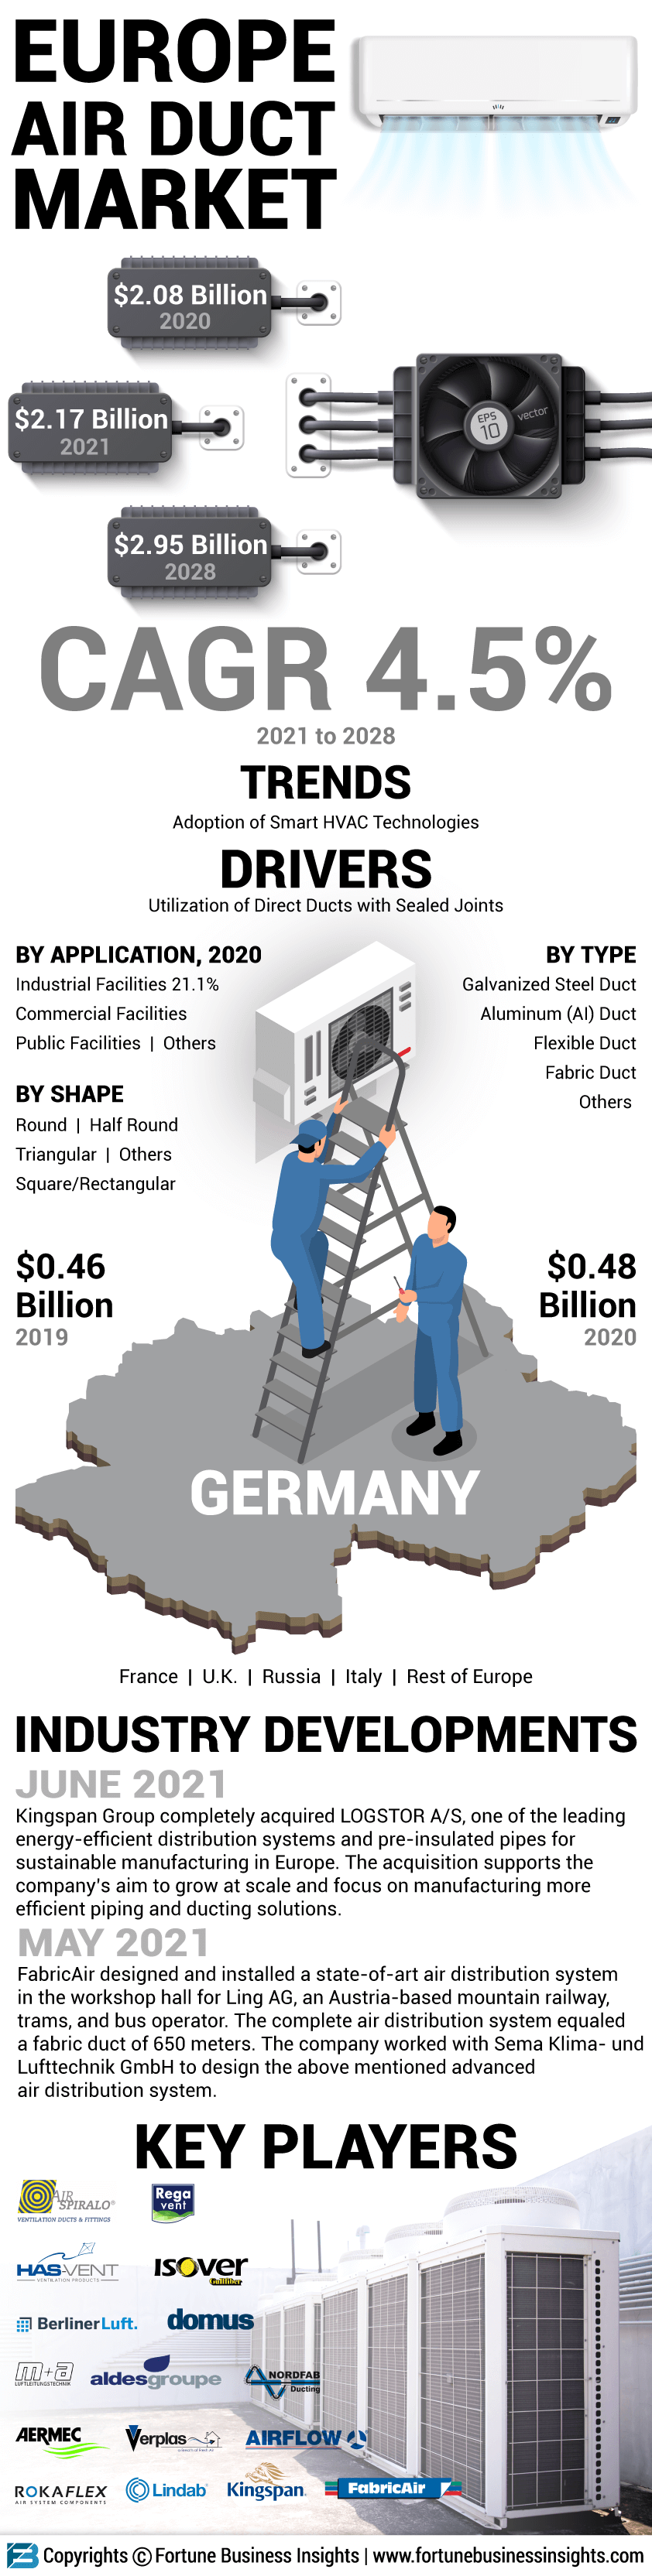 Europe Air Duct Market